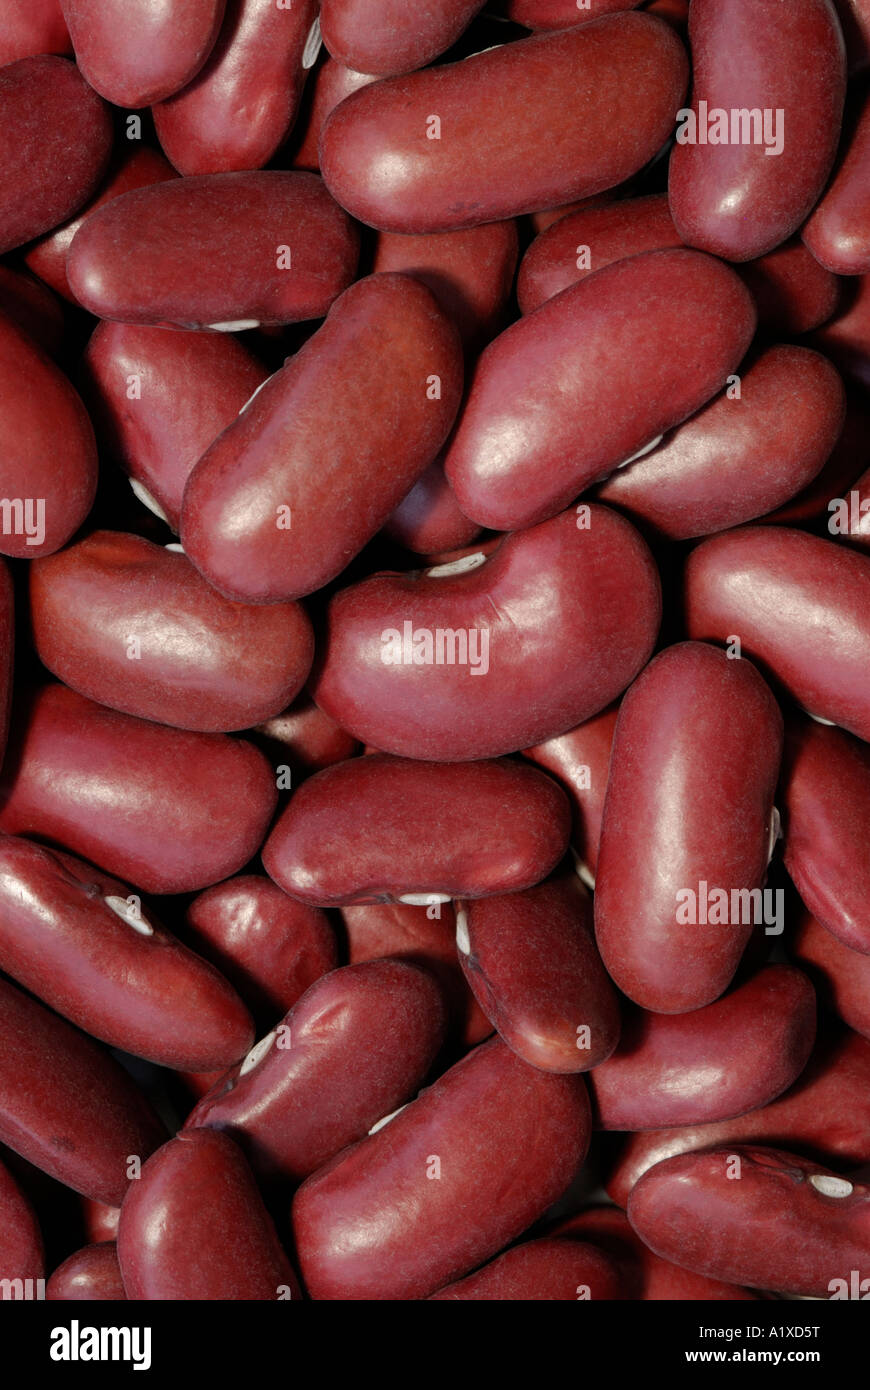 Bean Phaseolus vulgaris seeds Nitrogen fixing legumes such as these beans are a source of protein Stock Photo